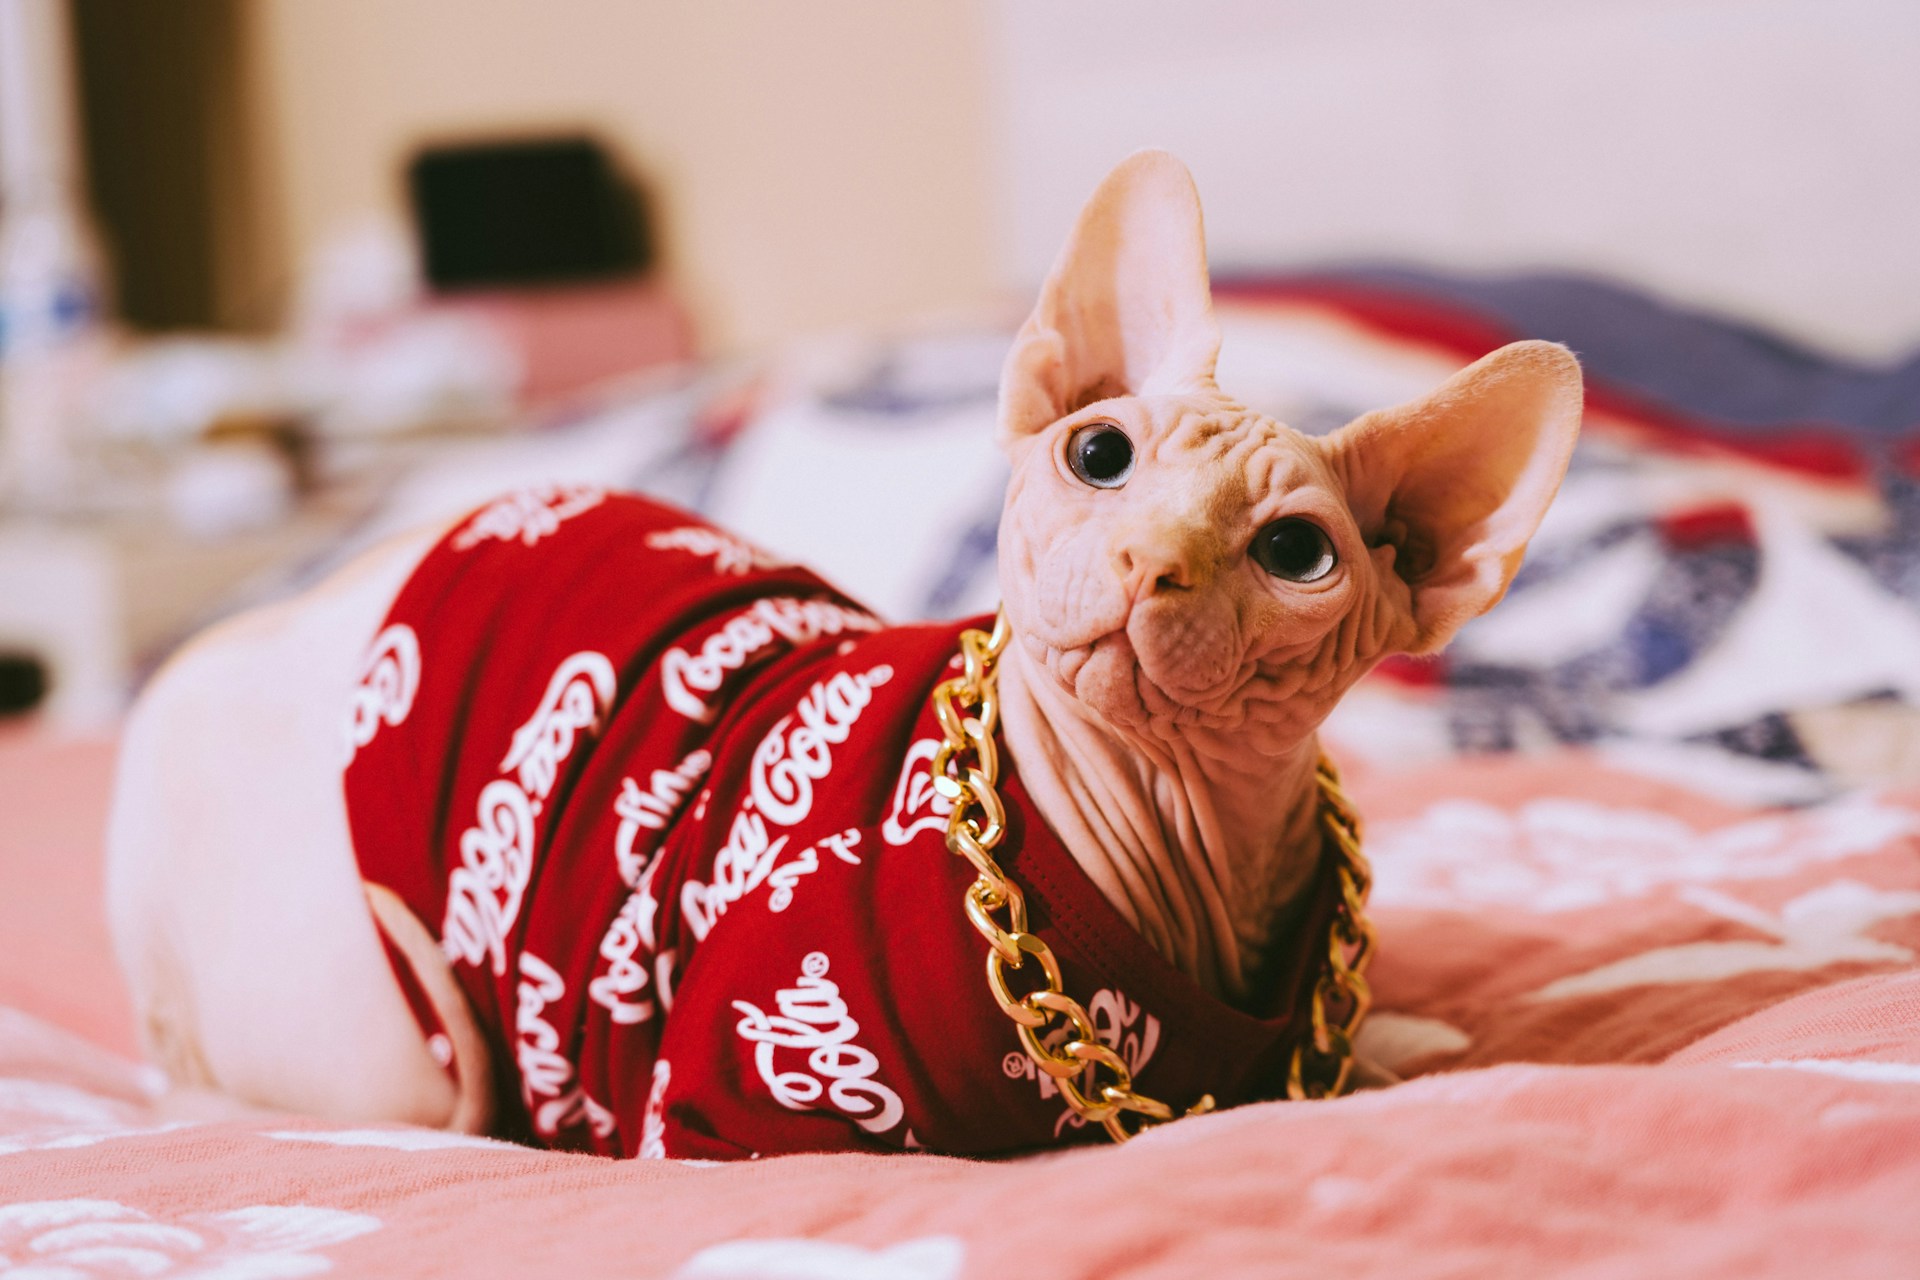 A hairless Sphynx cat wearing a red jacket sitting in bed